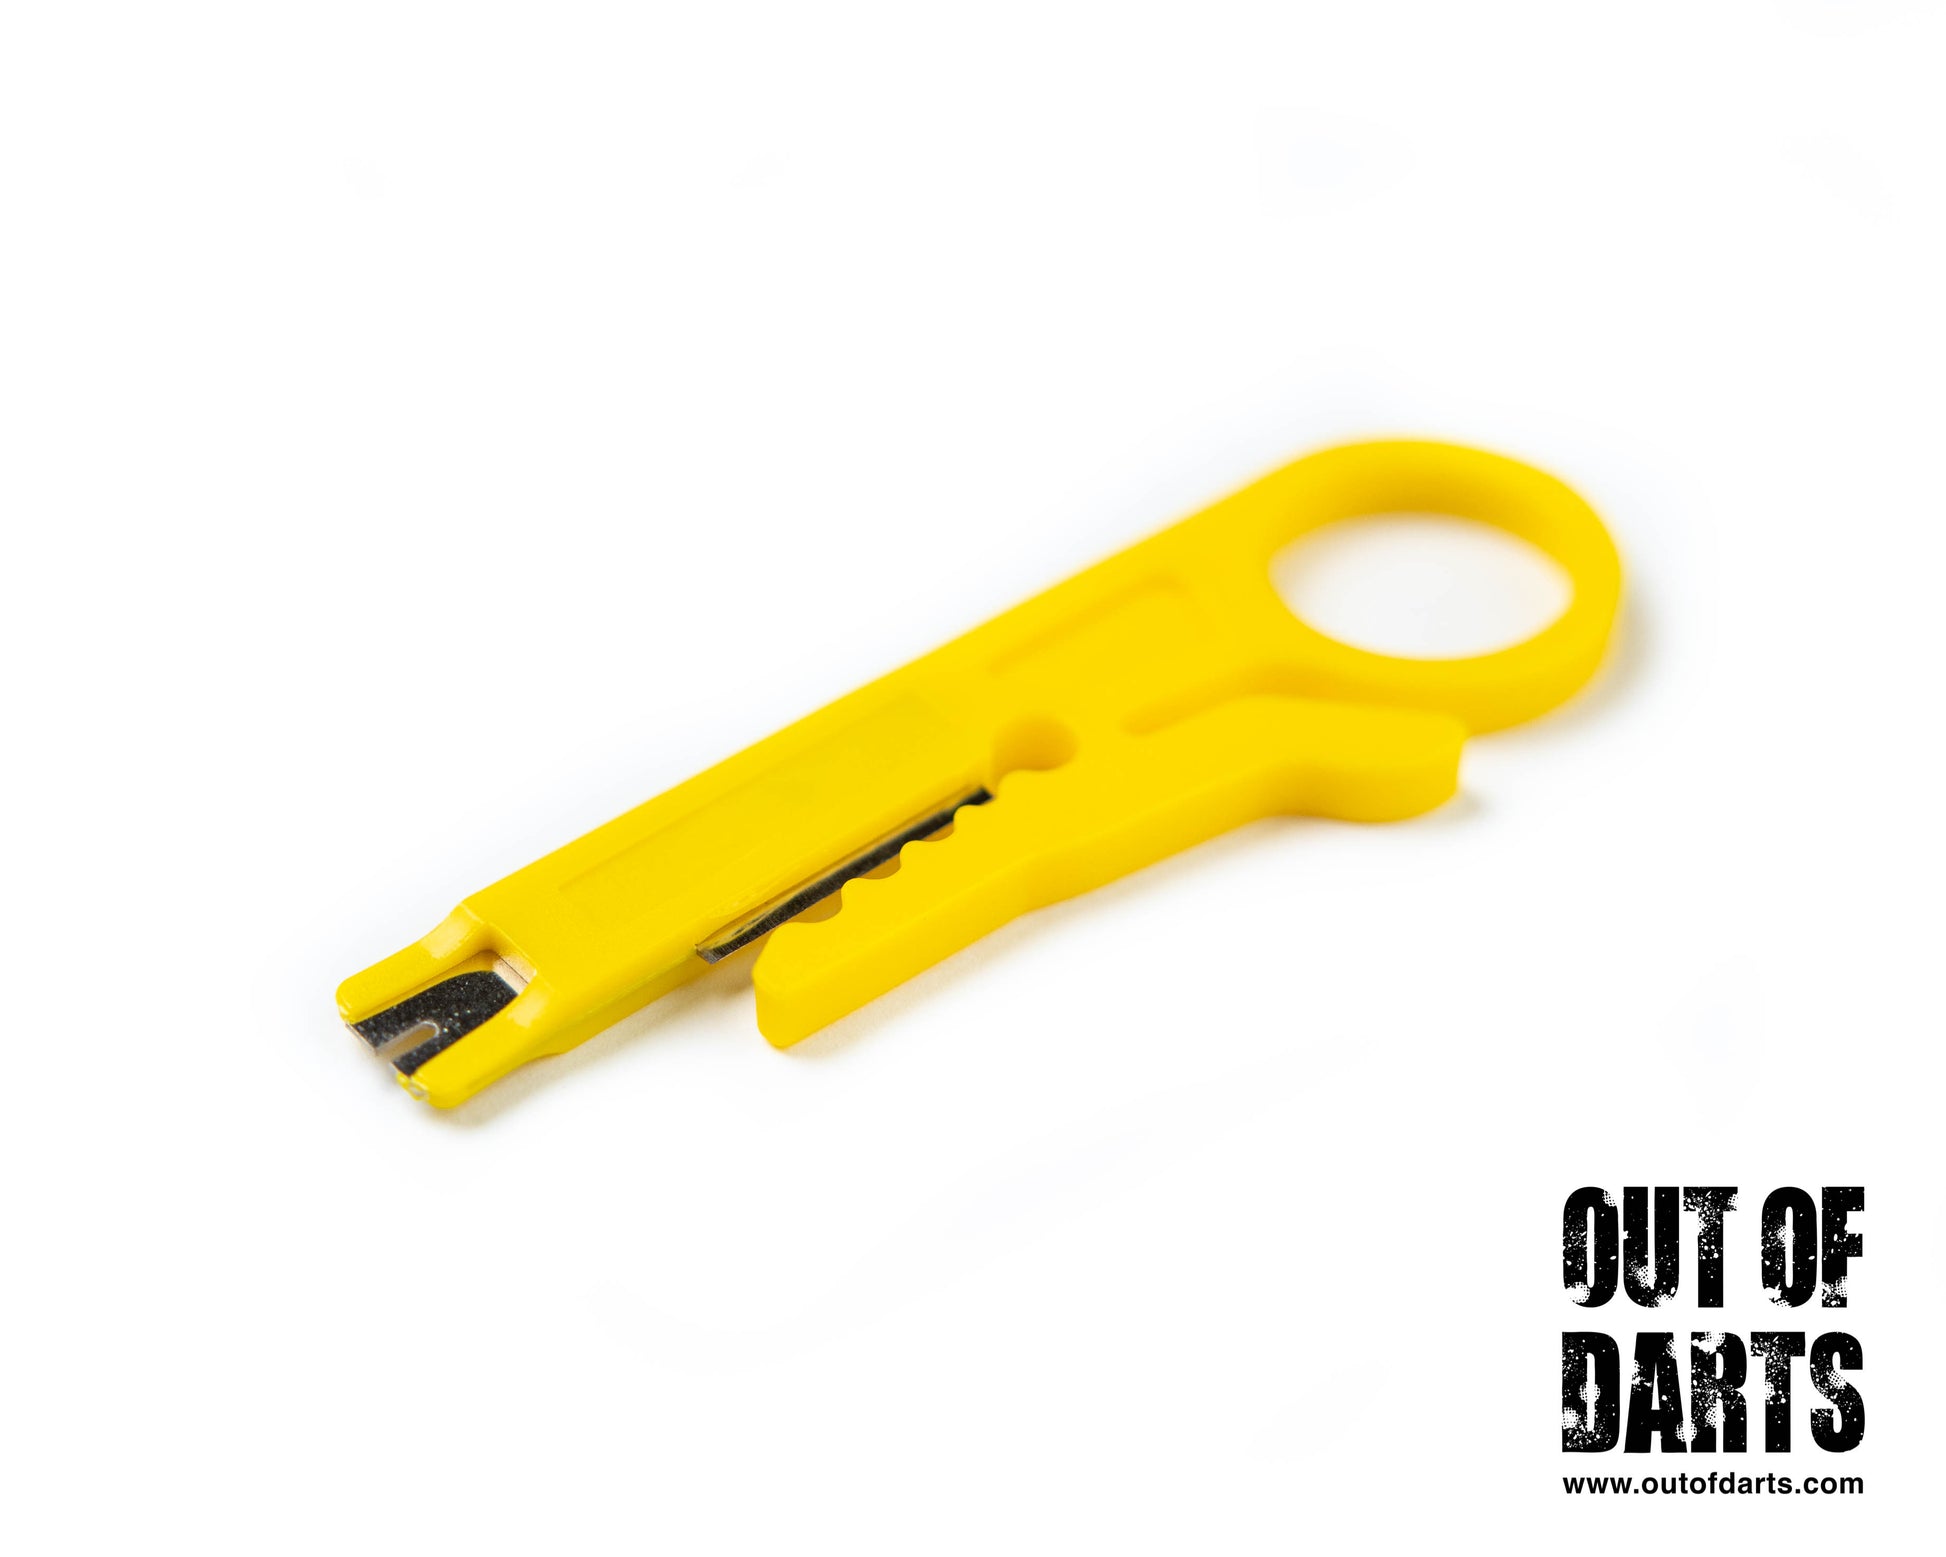 Budget Wire Stripper – Out of Darts